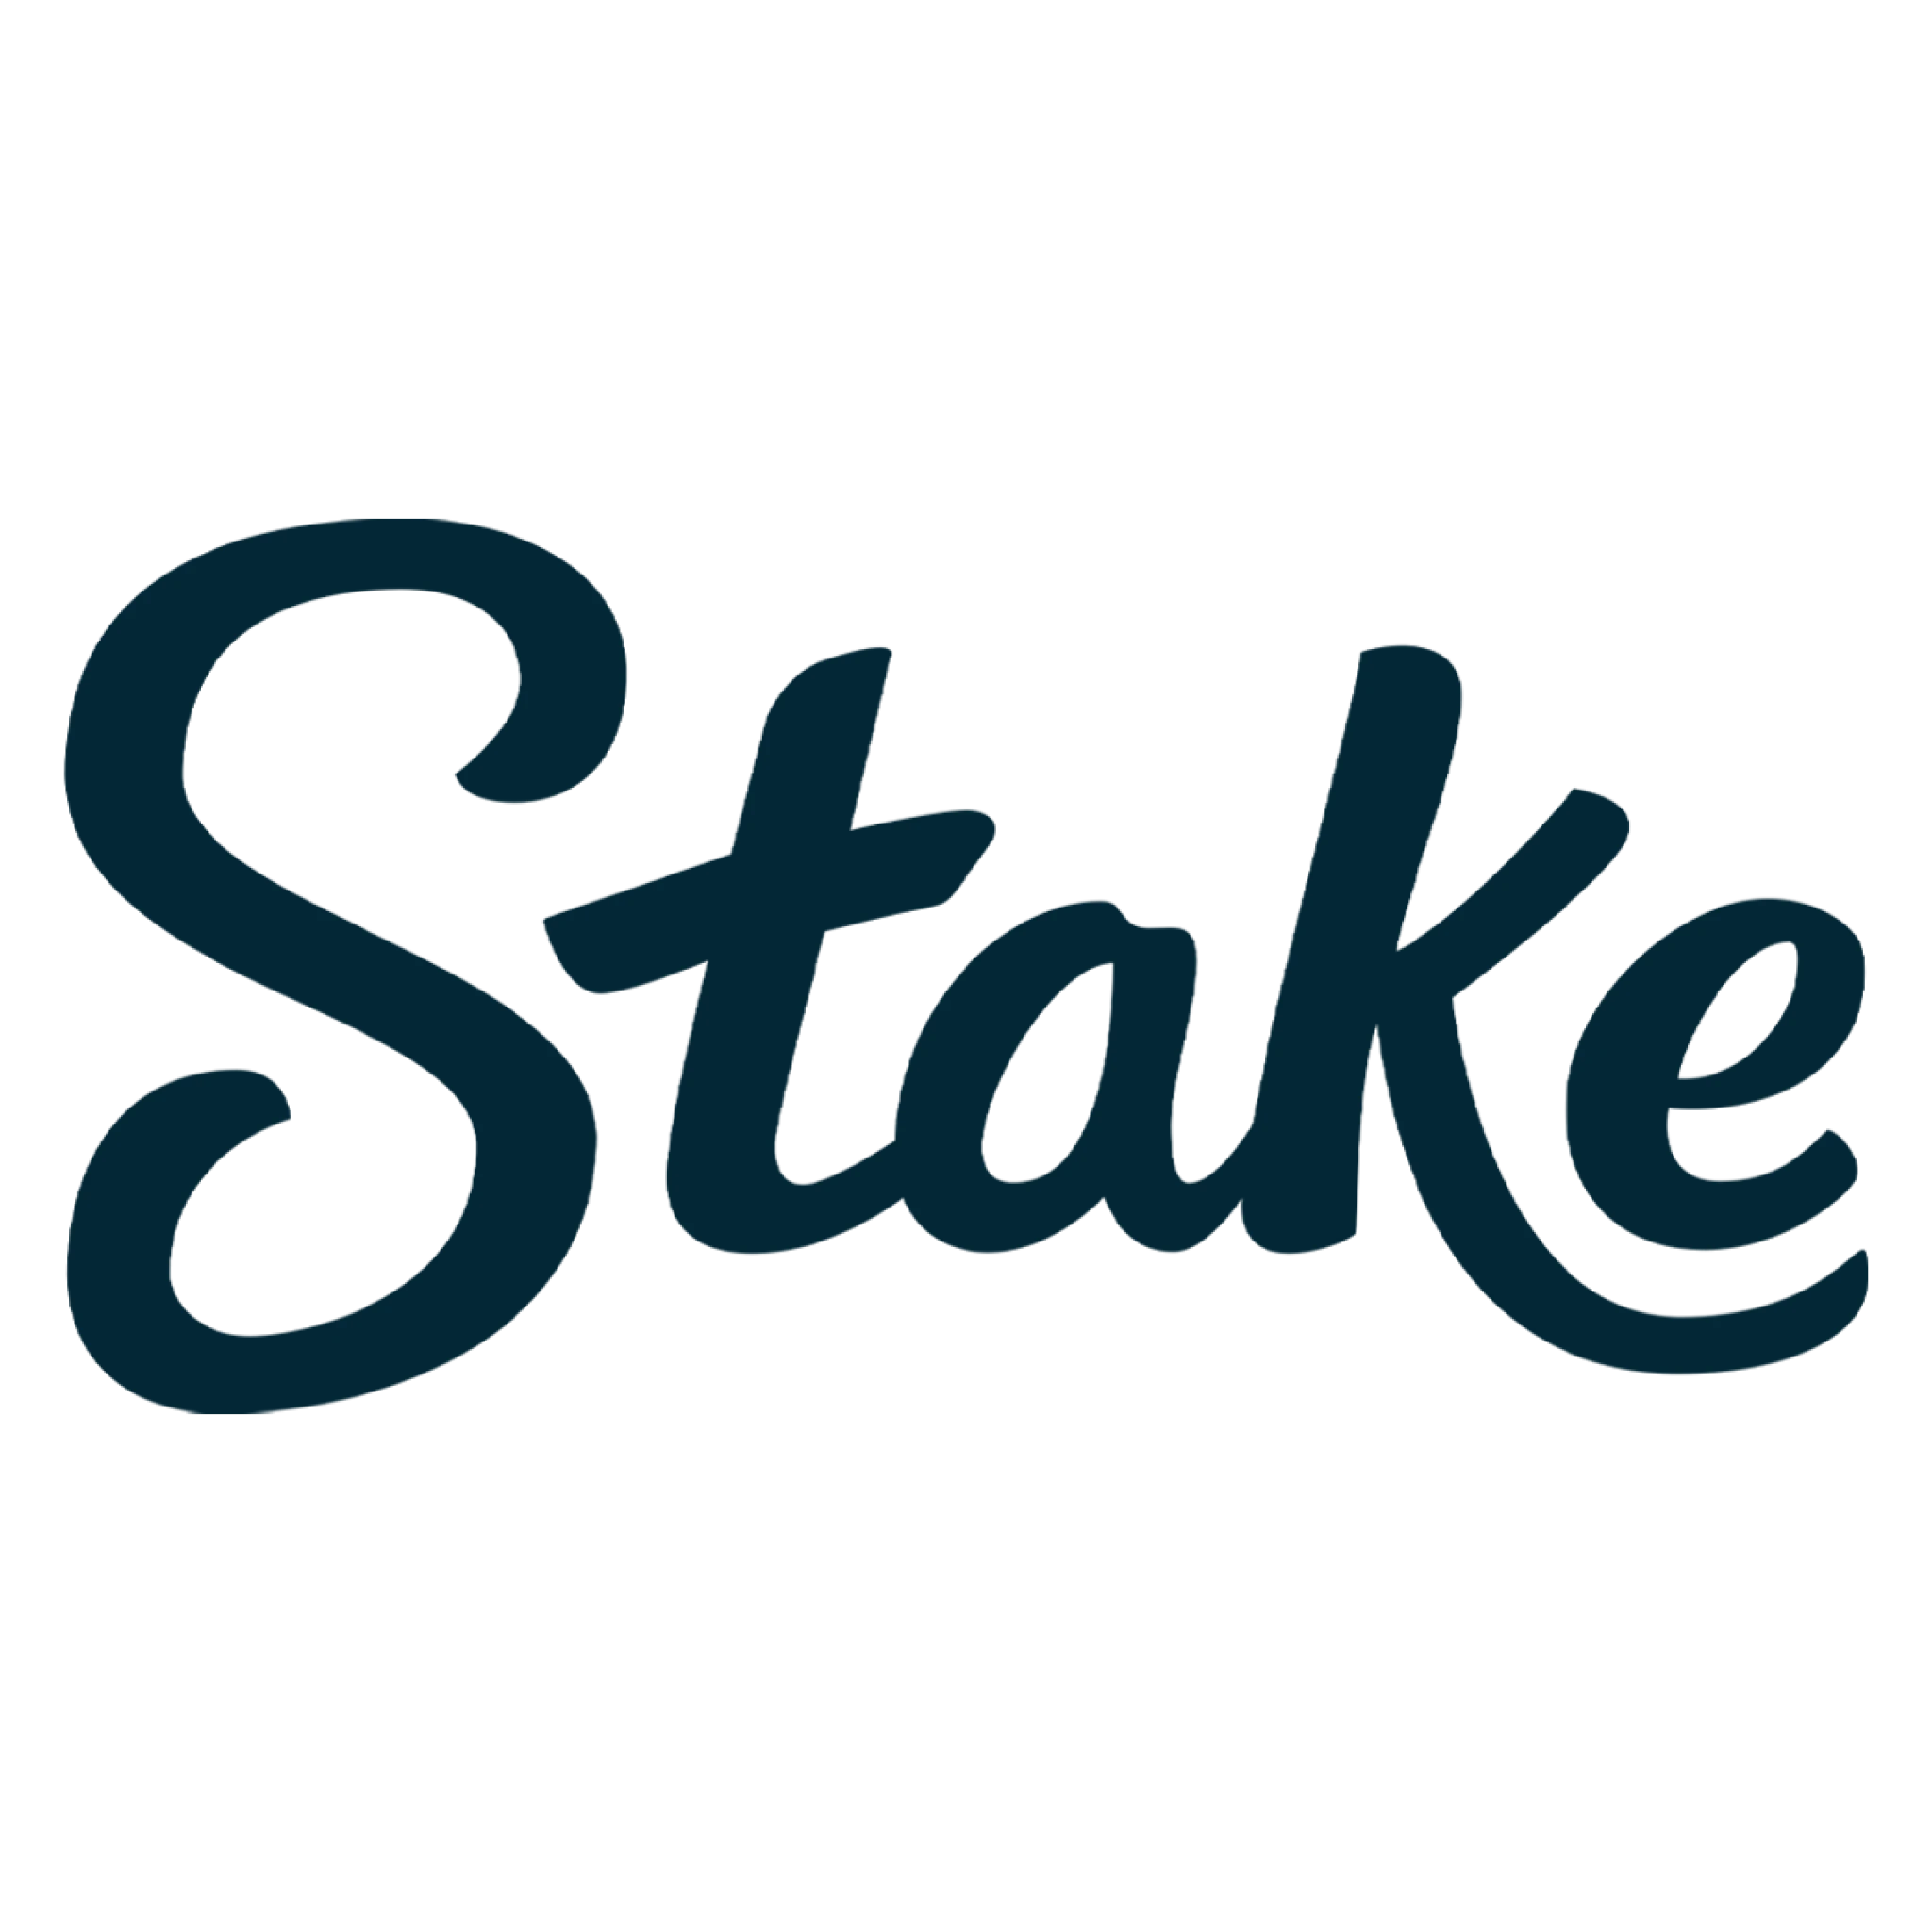 Stake is the gaming platform that will allow you to look at cricket betting from a completely different favorable angle